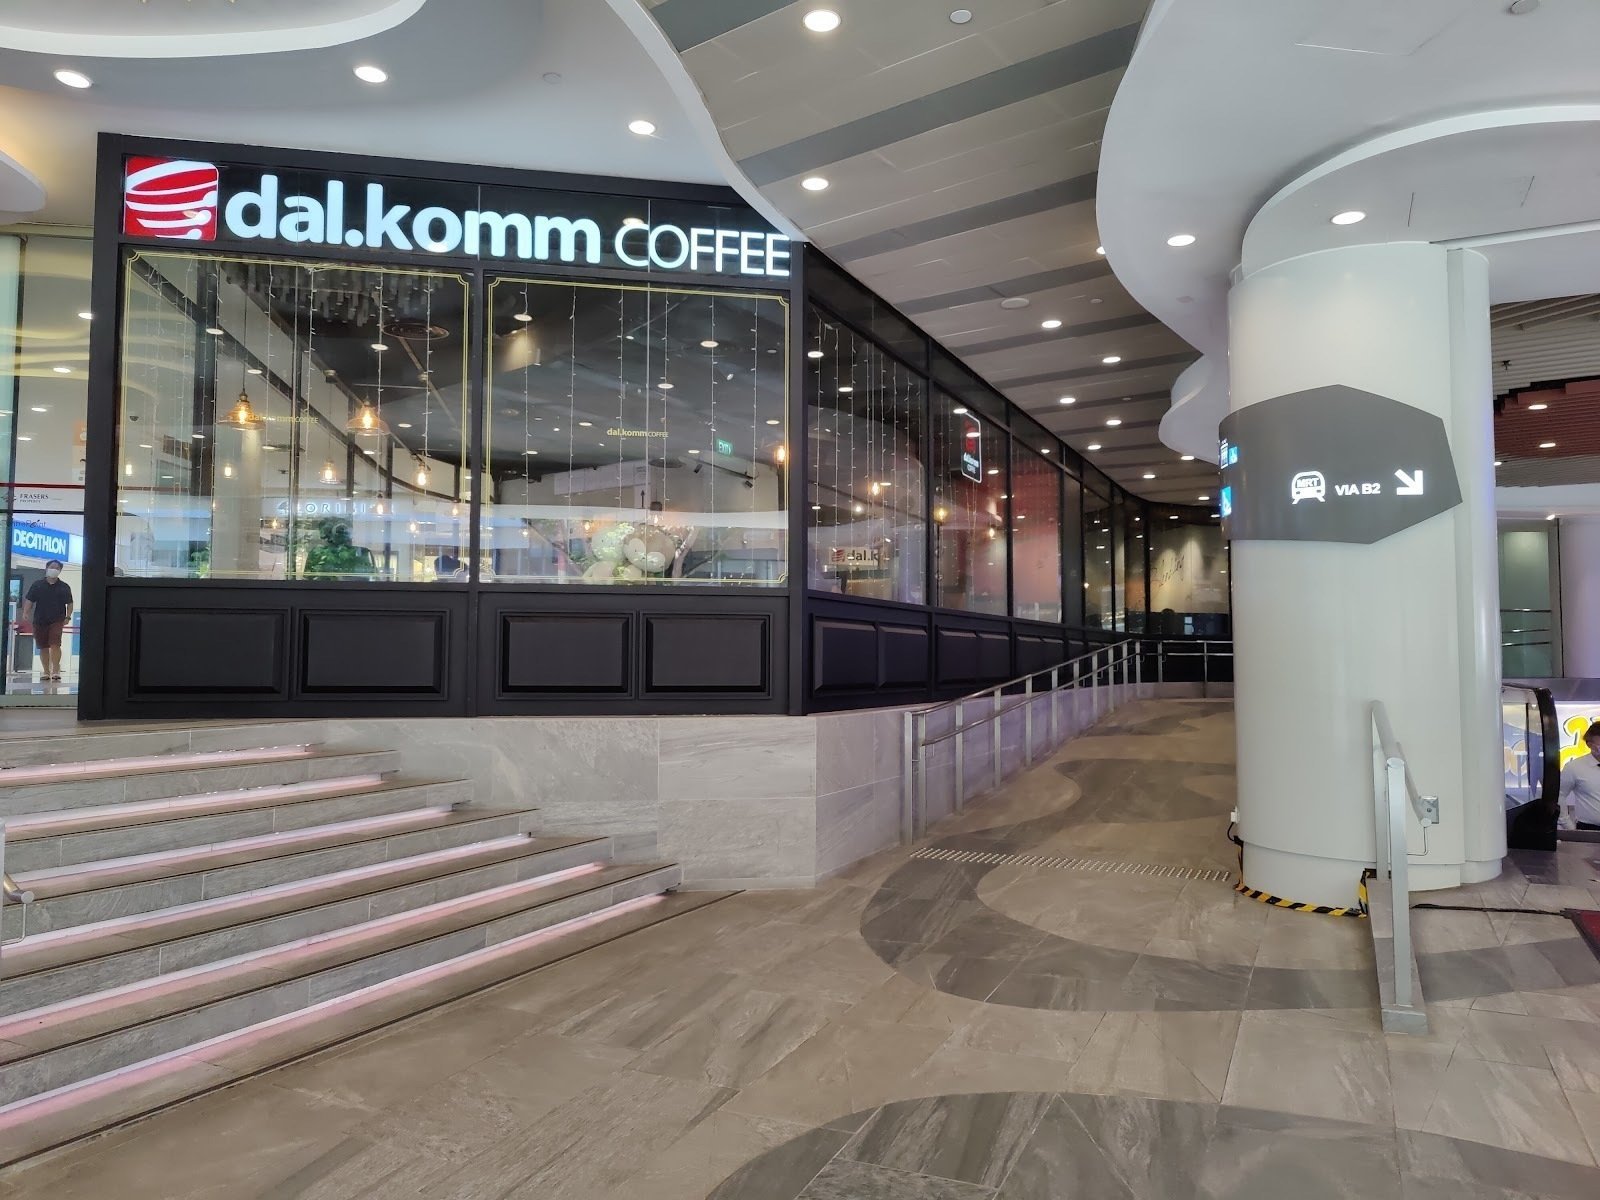 <span class="translation_missing" title="translation missing: en.meta.location_title, location_name: dal.komm COFFEE @ The Centrepoint, city: Singapore">Location Title</span>